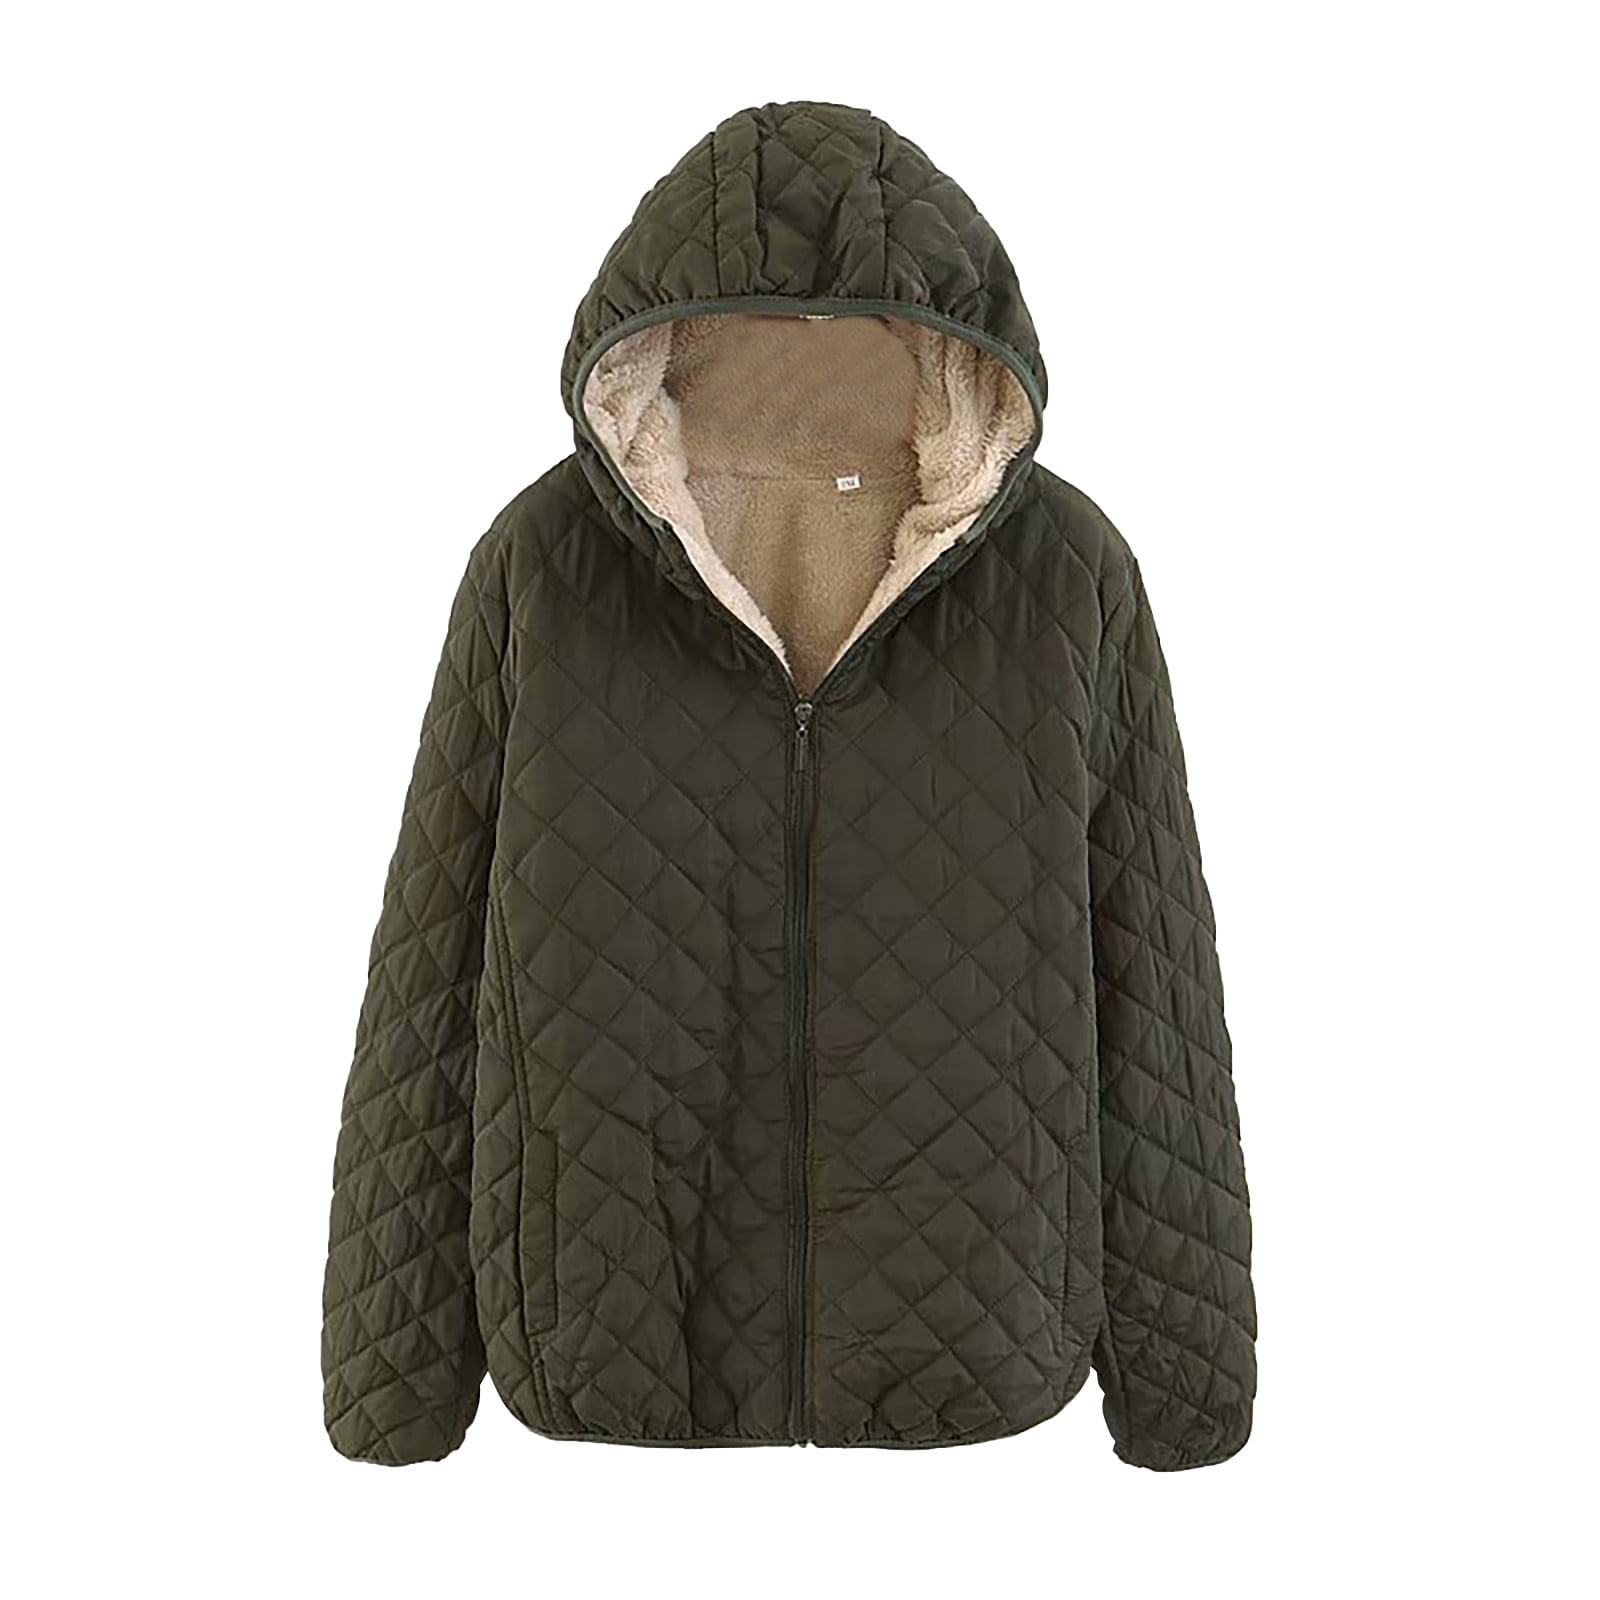 Aboser Womens Quilted Jacket with Hood Warm Plush Fleece Lined Coat ...